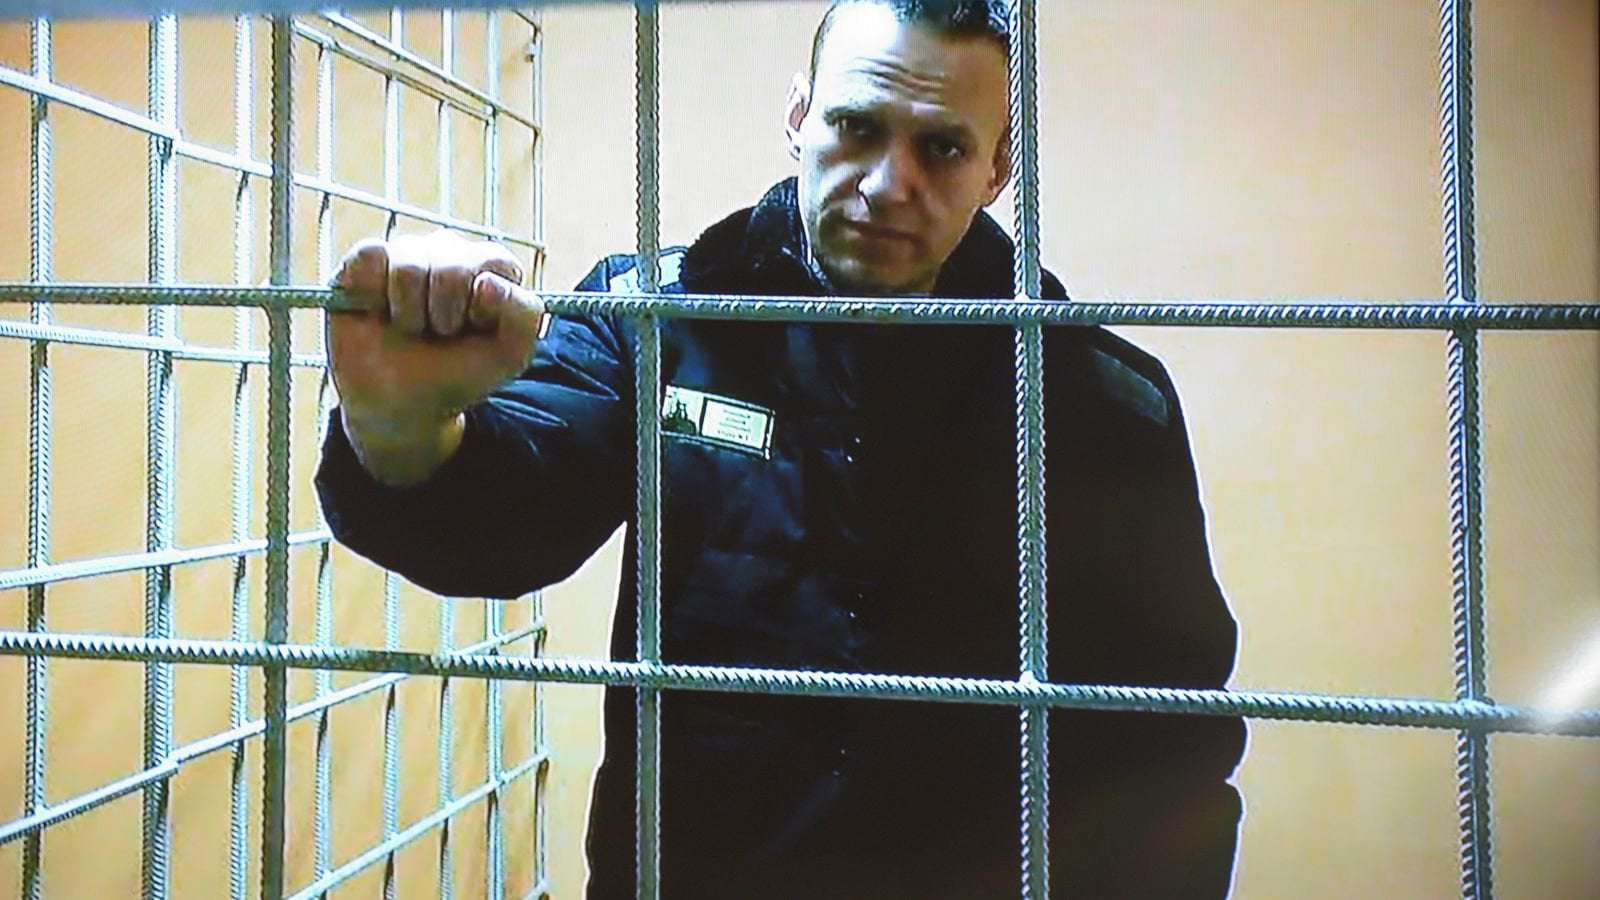 image for Alexei Navalny: Jailed Putin critic needs 'urgent medical assistance', Germany says